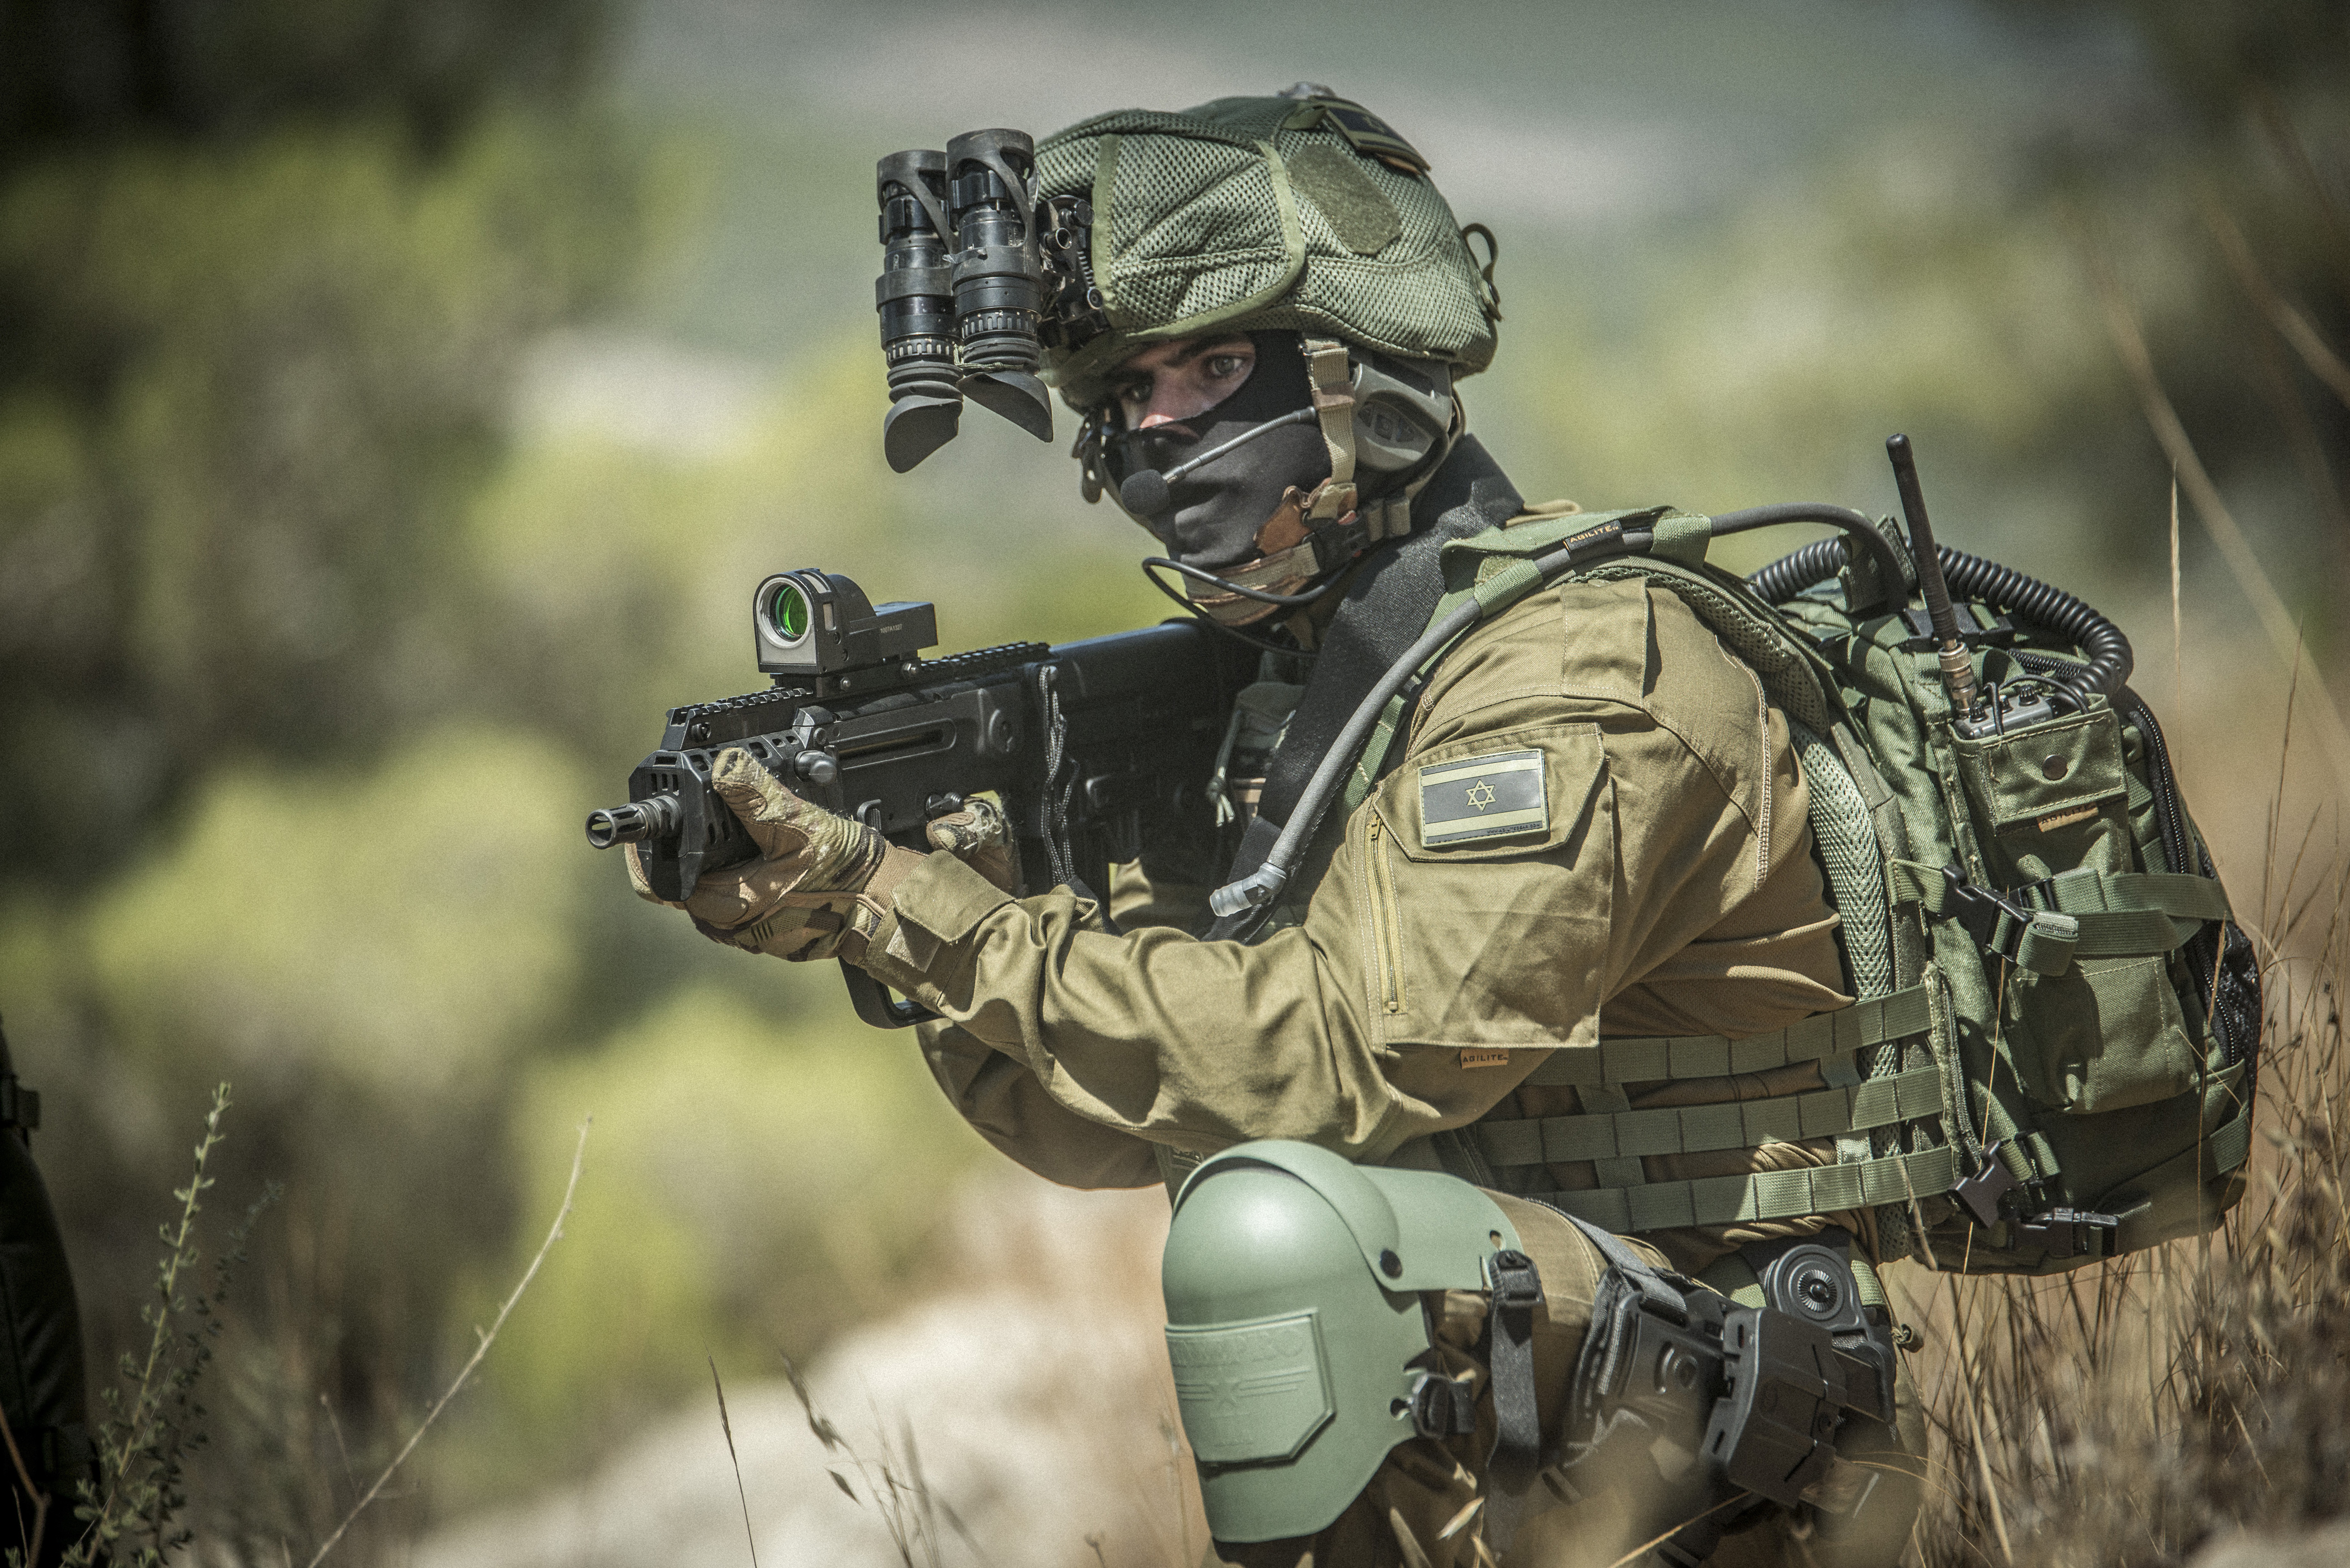 People 4200x2803 weapon squatting soldier Israel Defense Forces tactical military men